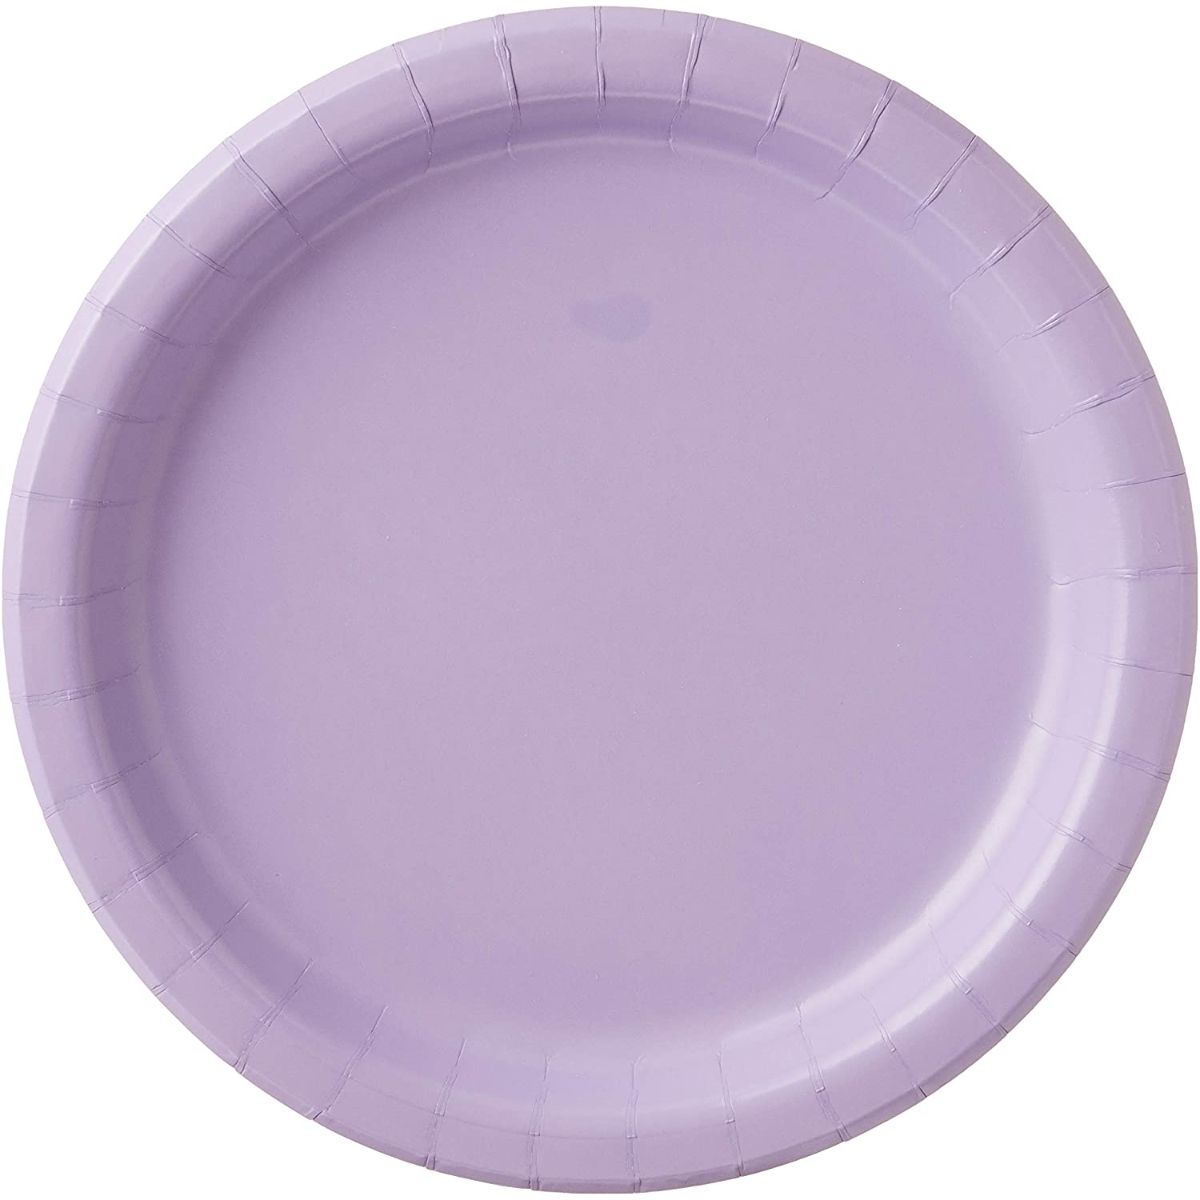 Creative Converting 318918 Amethyst Square Lunch Plate, 7, Purple